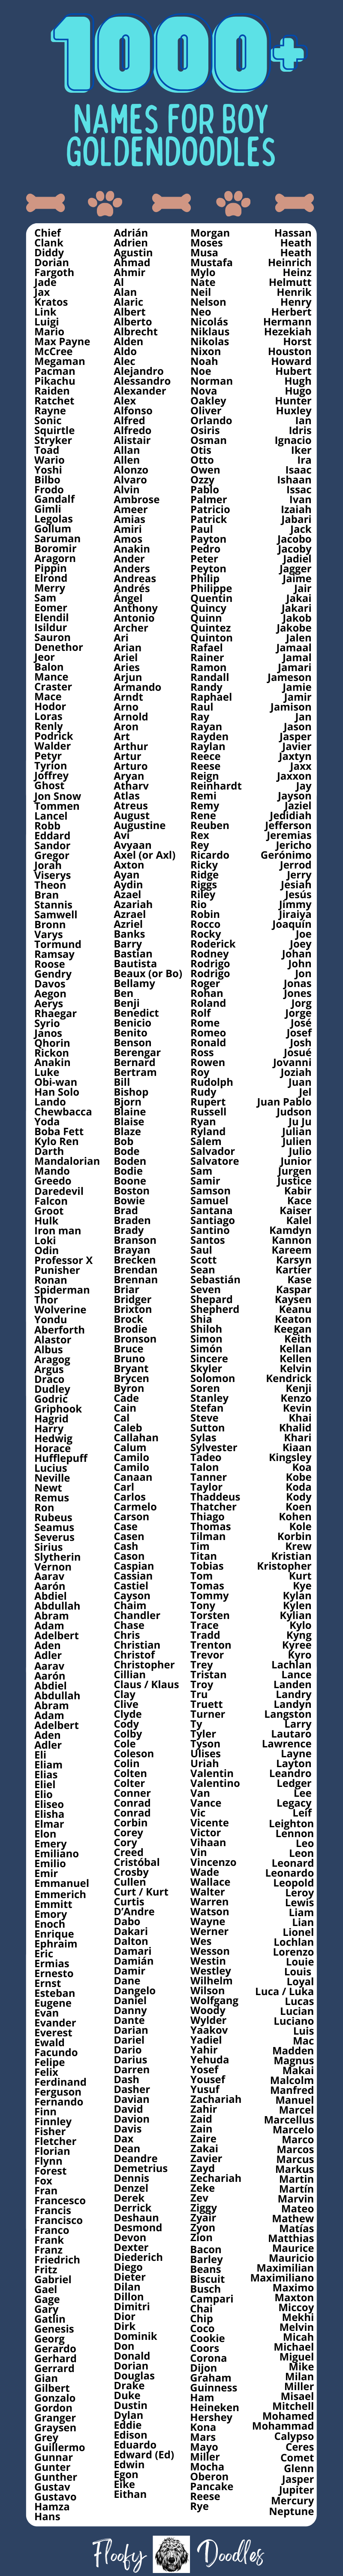 Visual list of over 1000 names for boy goldendoodles